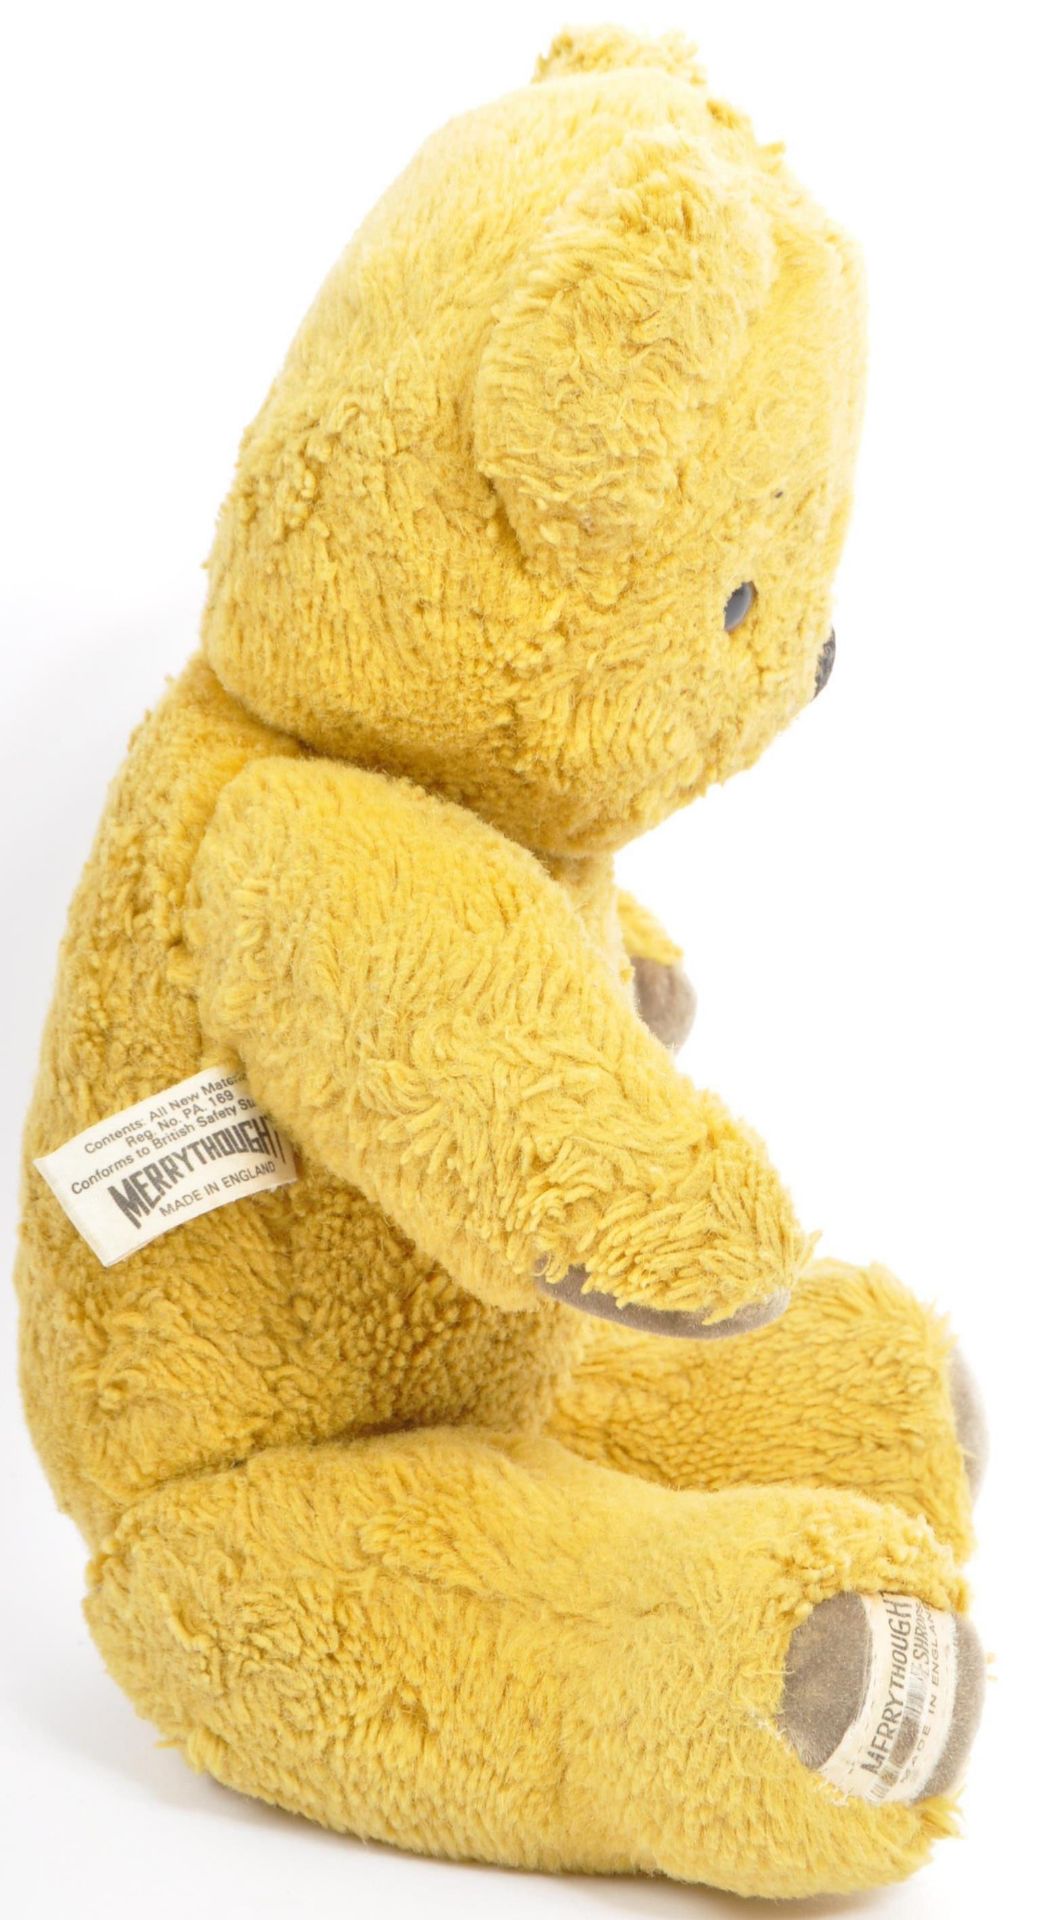 VINTAGE MERRYTHOUGHT SOFT TOY TEDDY BEAR - Image 4 of 6